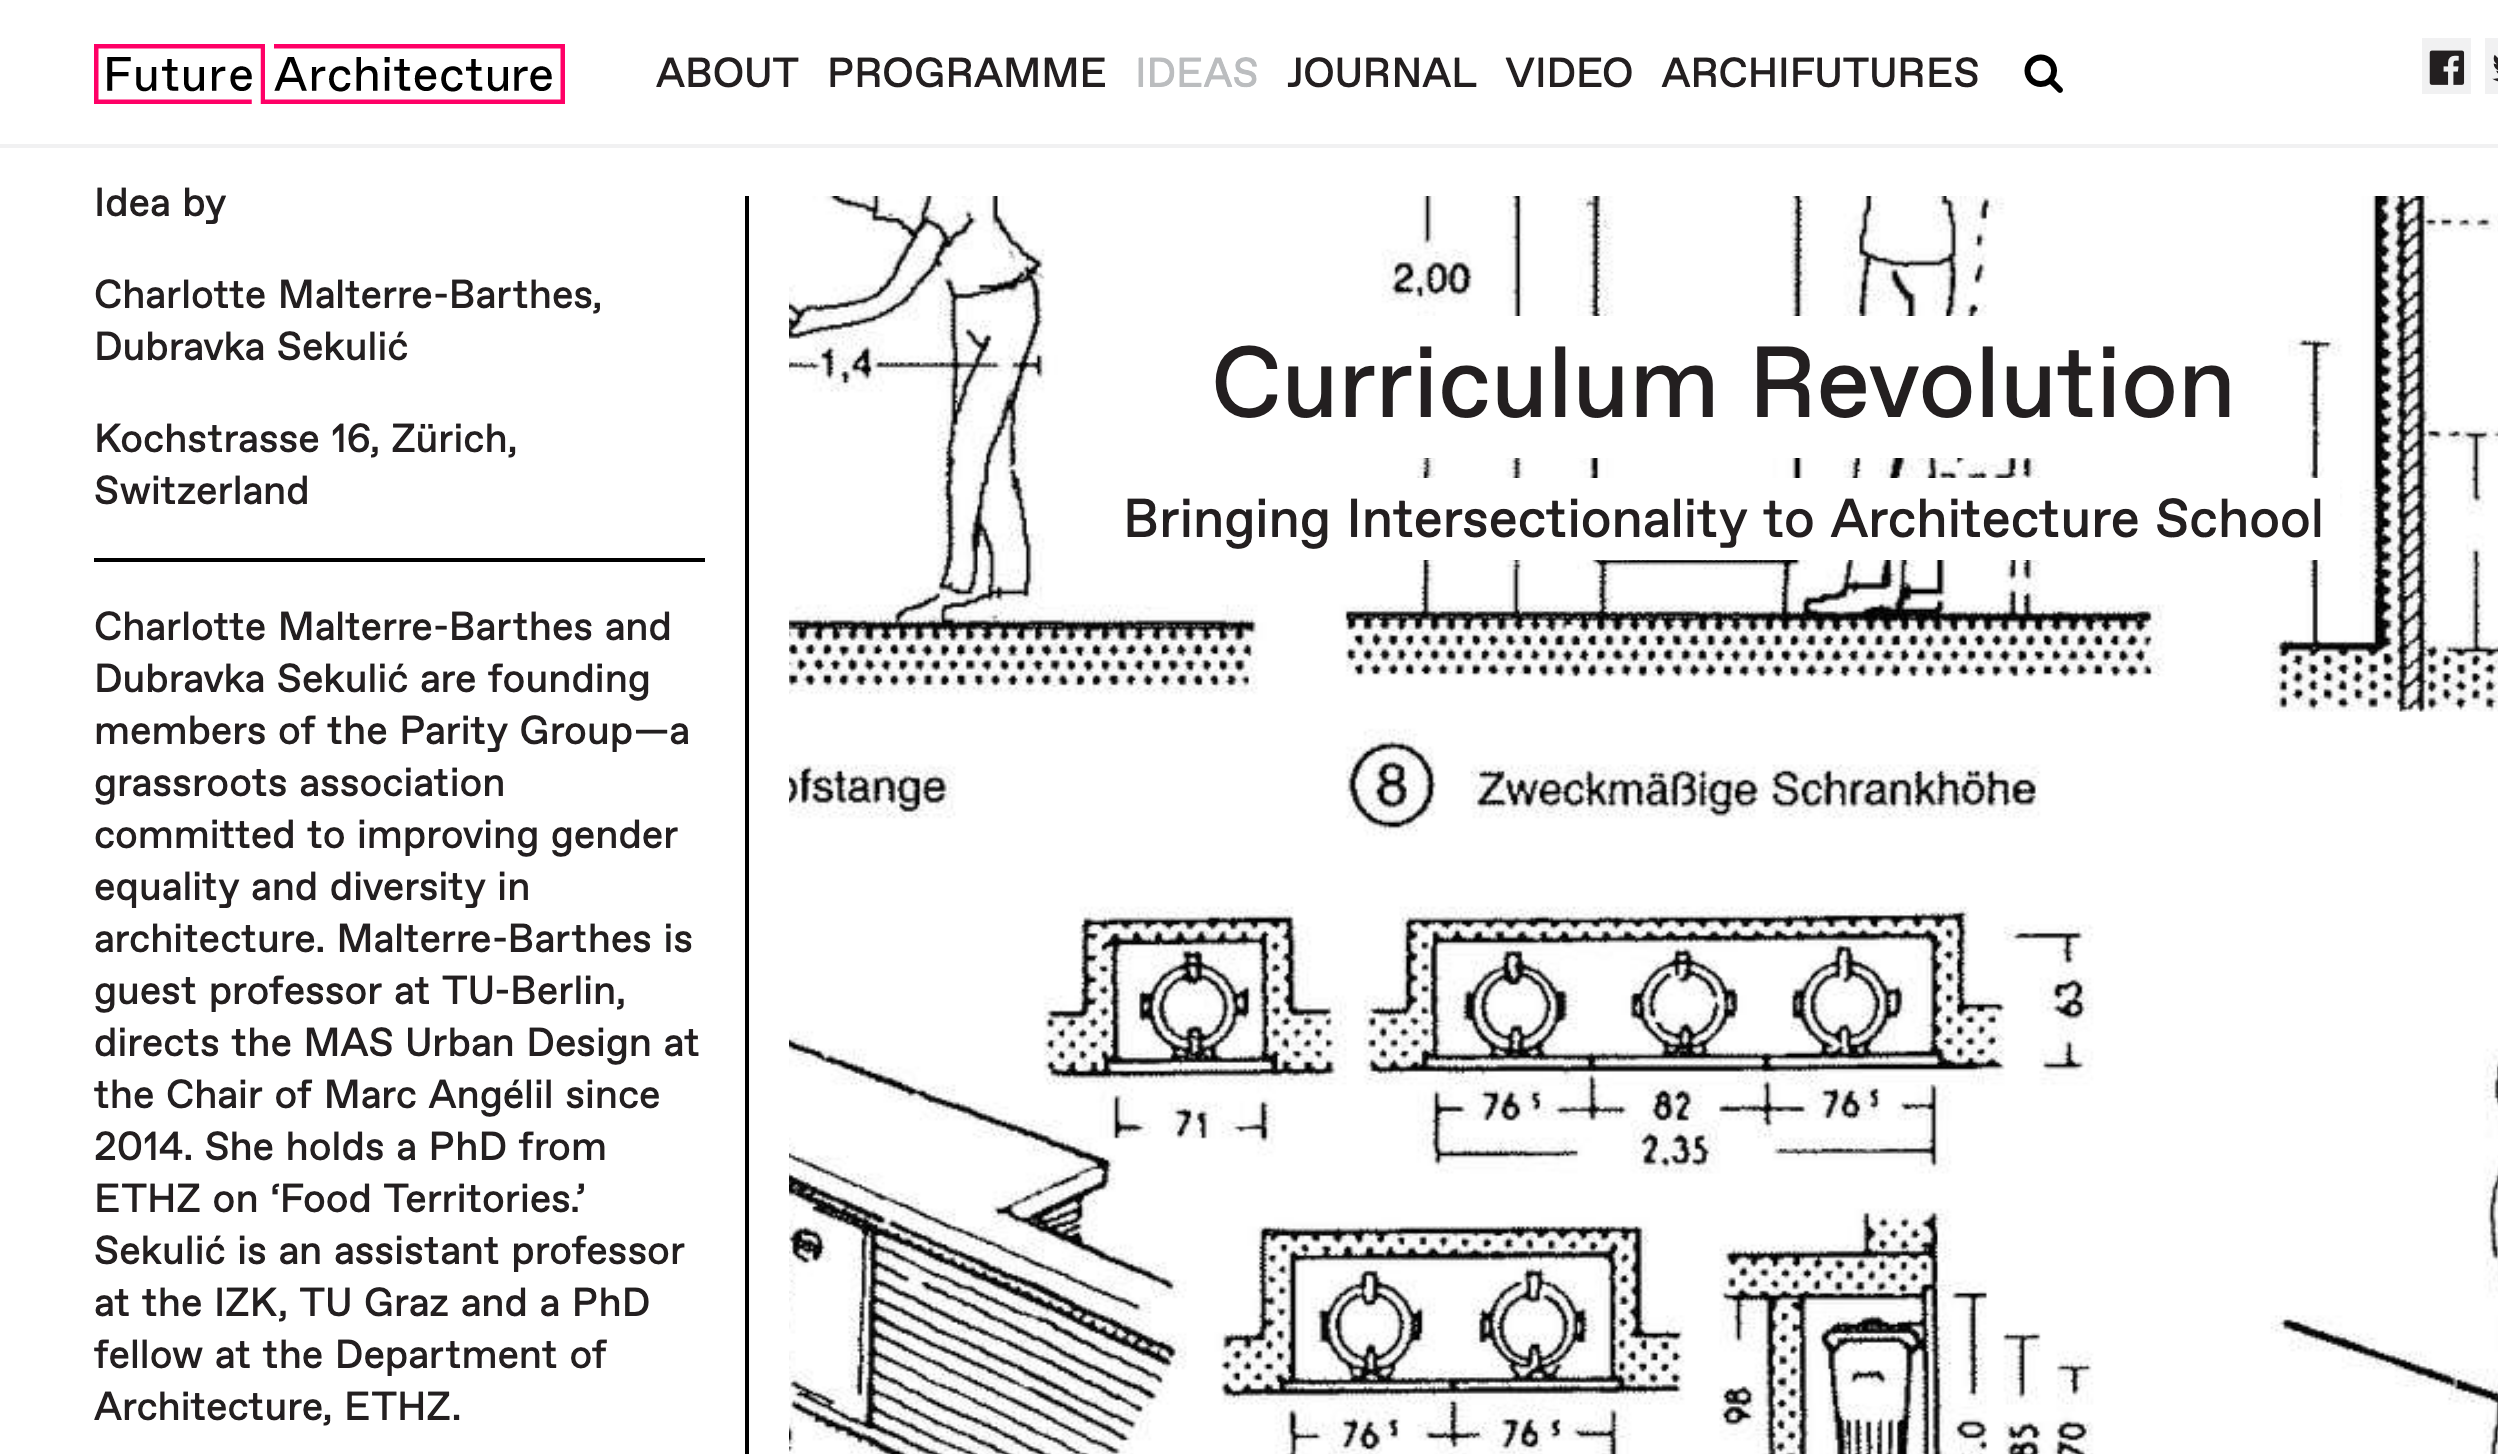 Curriculum Revolution: Intersectionality in Architecture